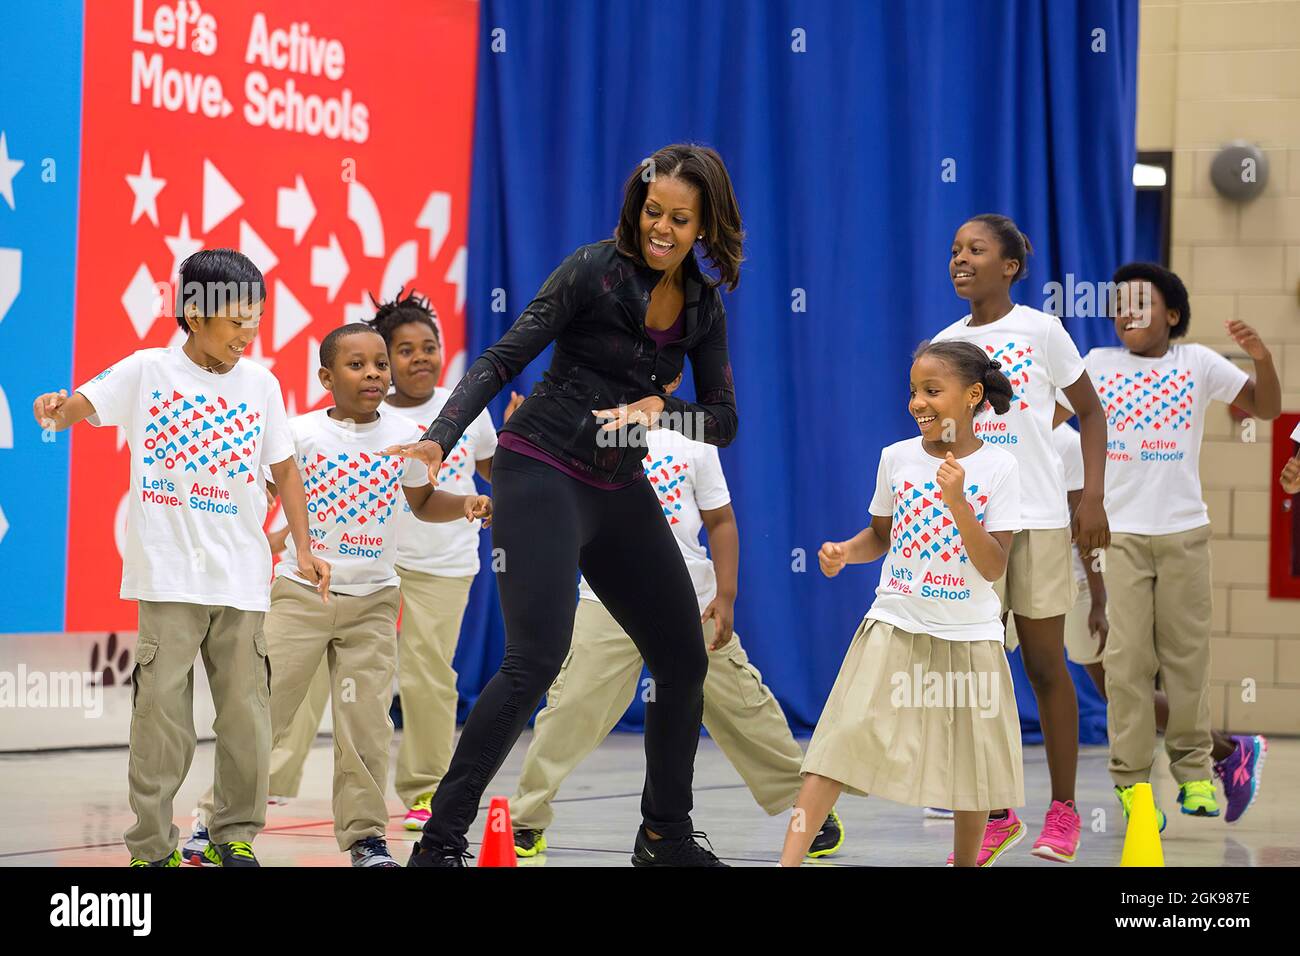 First Lady Michelle Obama participates in musical activities with students during a back to school 'Let's Move!' Active Schools event at Orr Elementary School in Washington, D.C., Sept. 6, 2013. (Official White House Photo by Chuck Kennedy) This official White House photograph is being made available only for publication by news organizations and/or for personal use printing by the subject(s) of the photograph. The photograph may not be manipulated in any way and may not be used in commercial or political materials, advertisements, emails, products, promotions that in any way suggests approval Stock Photo